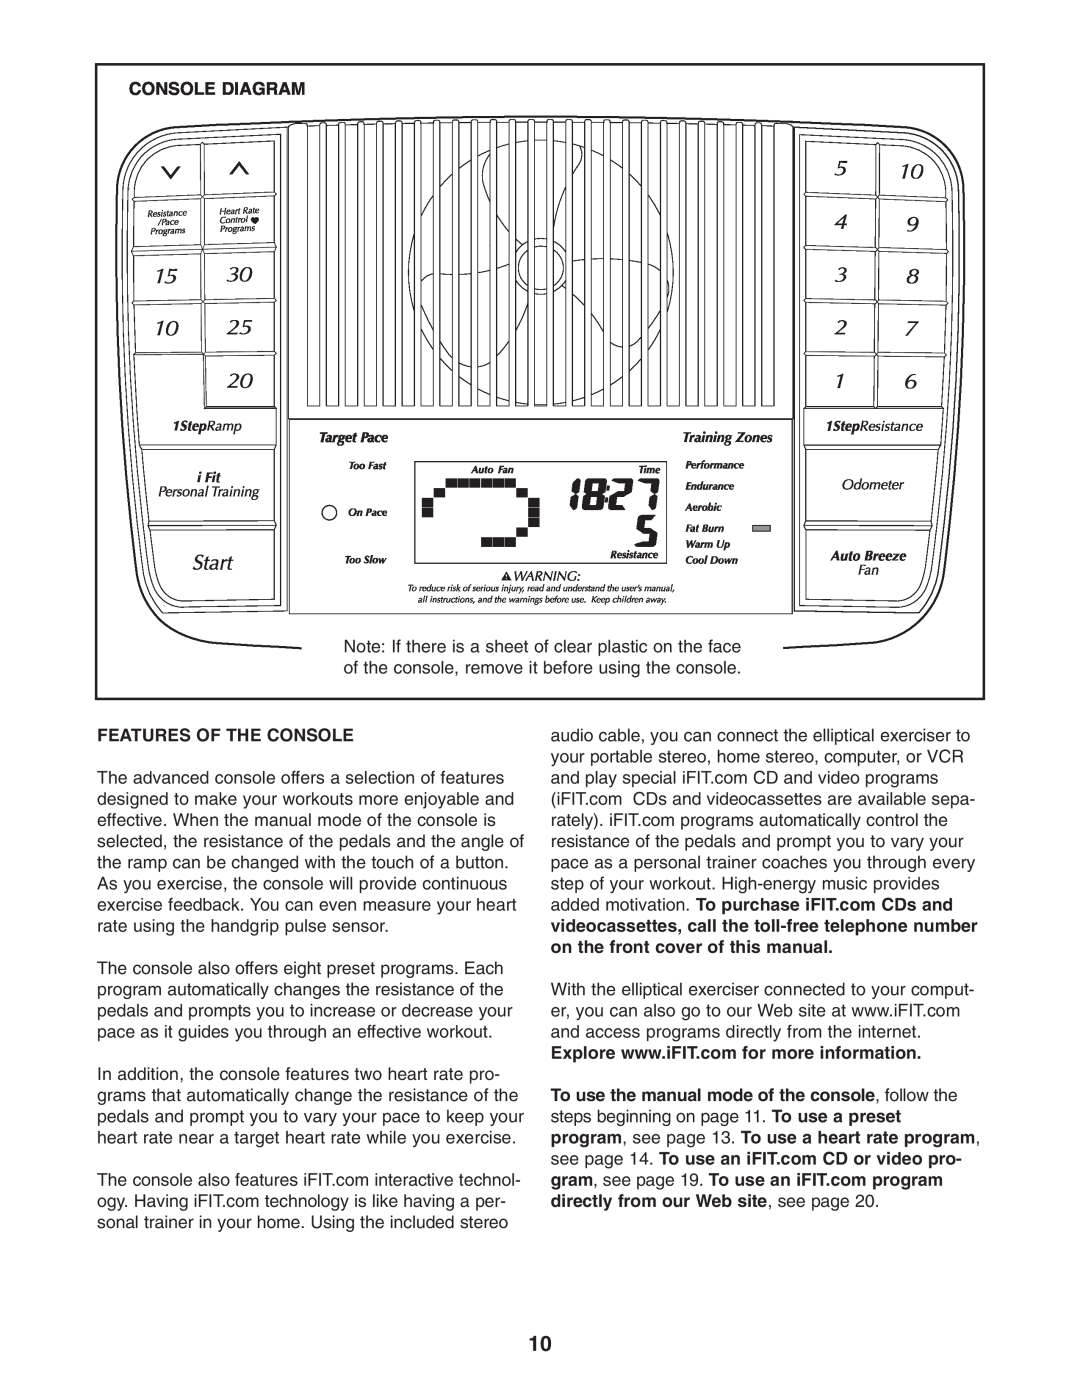 NordicTrack NEL7095.1 user manual Console Diagram, Features Of The Console 